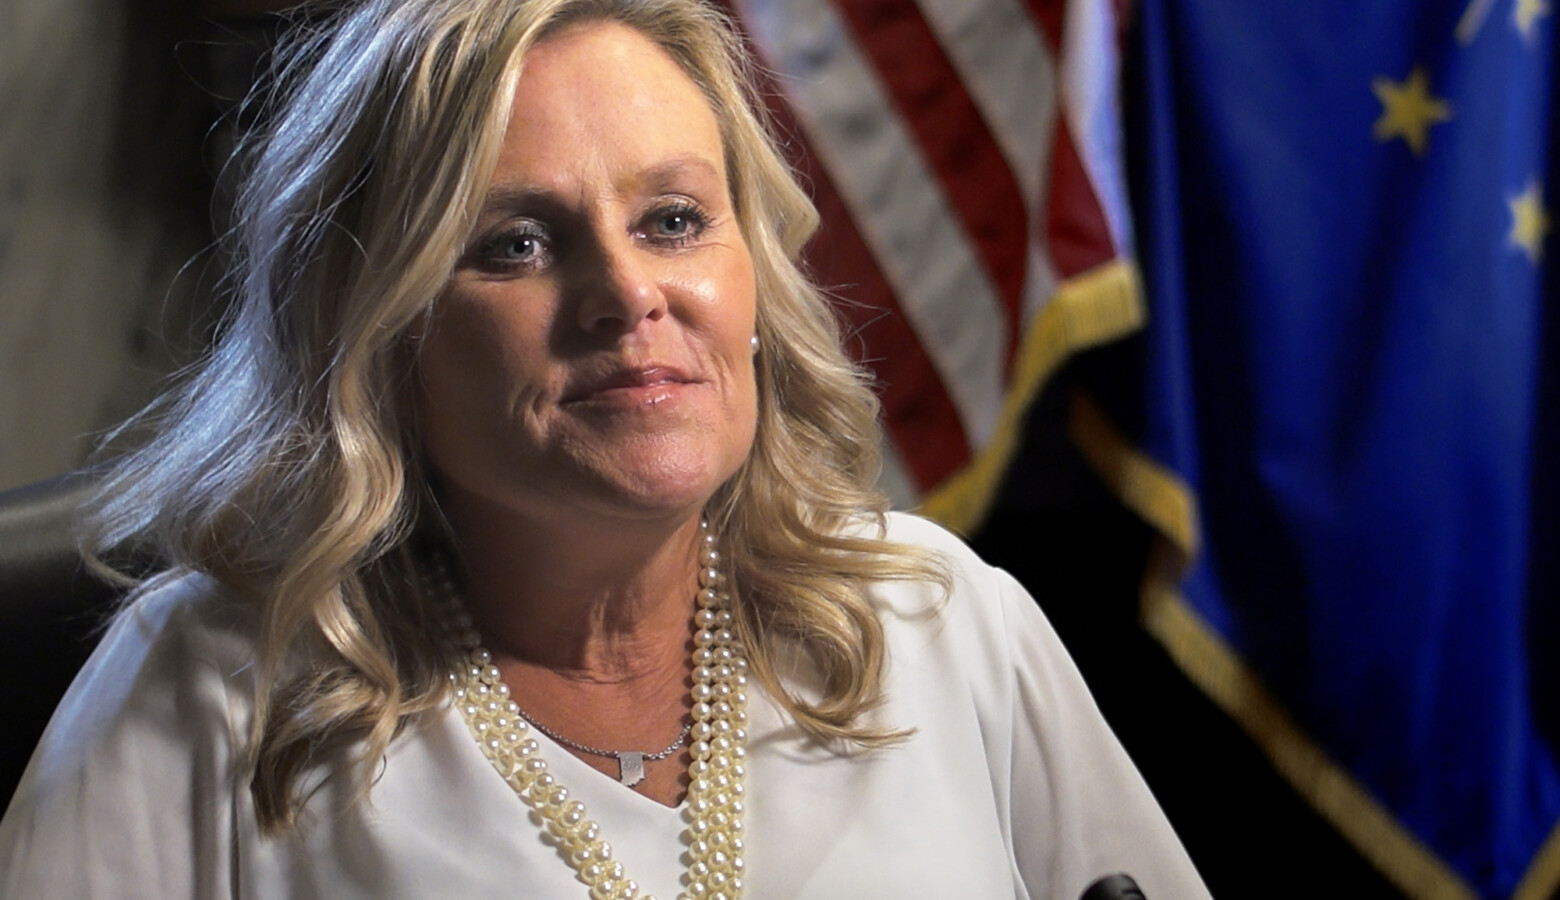 Indiana's final elected Superintendent of Public Instruction Jennifer McCormick says the presidential election will have a huge impact on public school funding. (Alan Mbathi/IPB News)